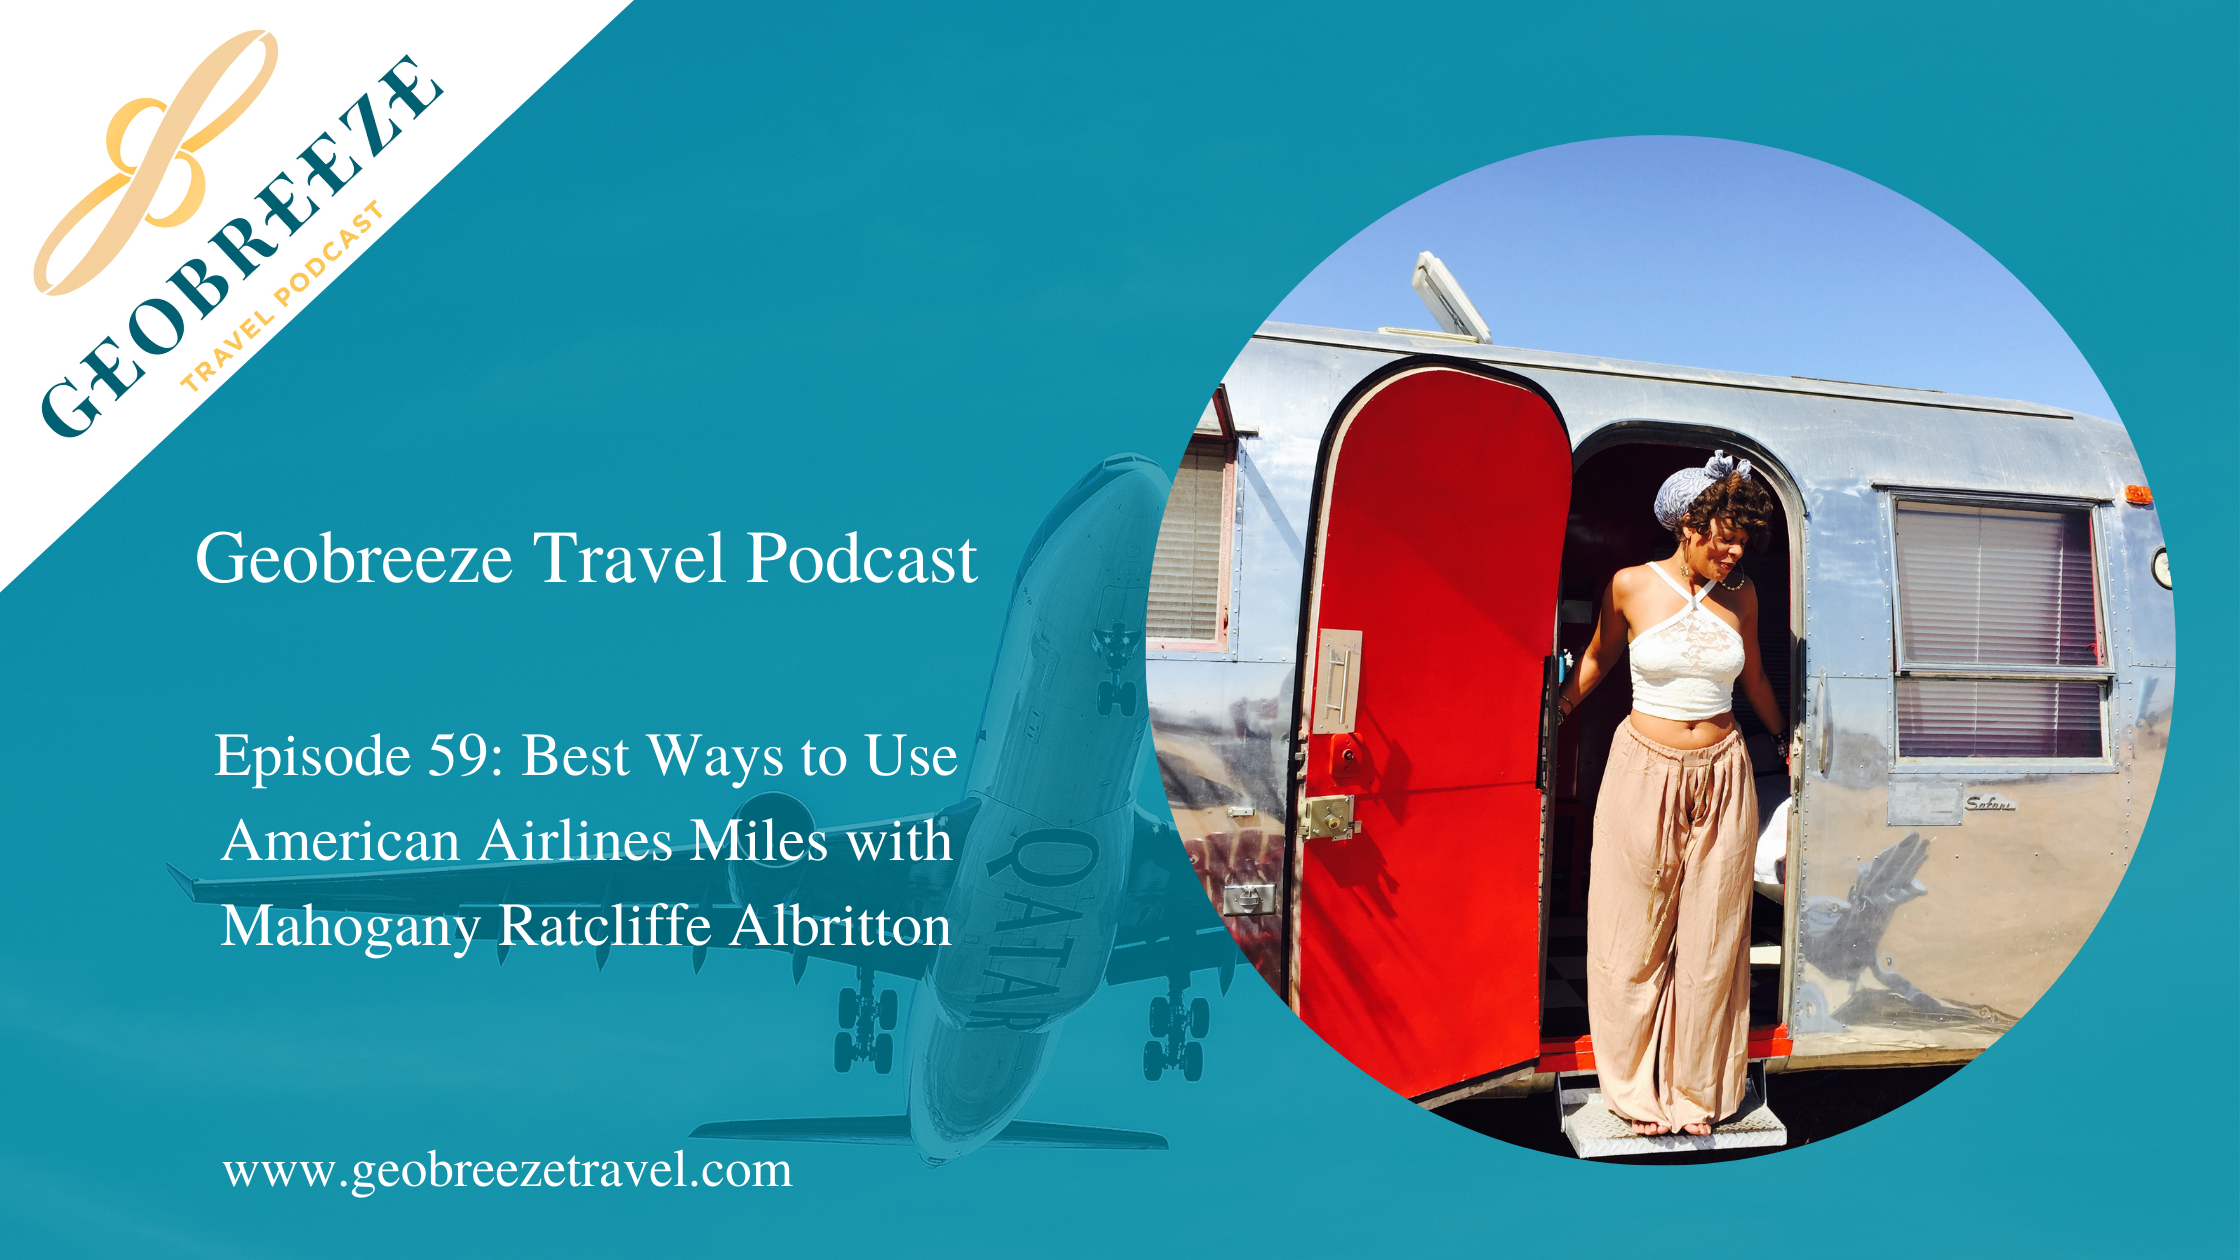 Episode 59: The Best Ways to Use American Airlines Miles with Mahogany Ratcliffe Albritton